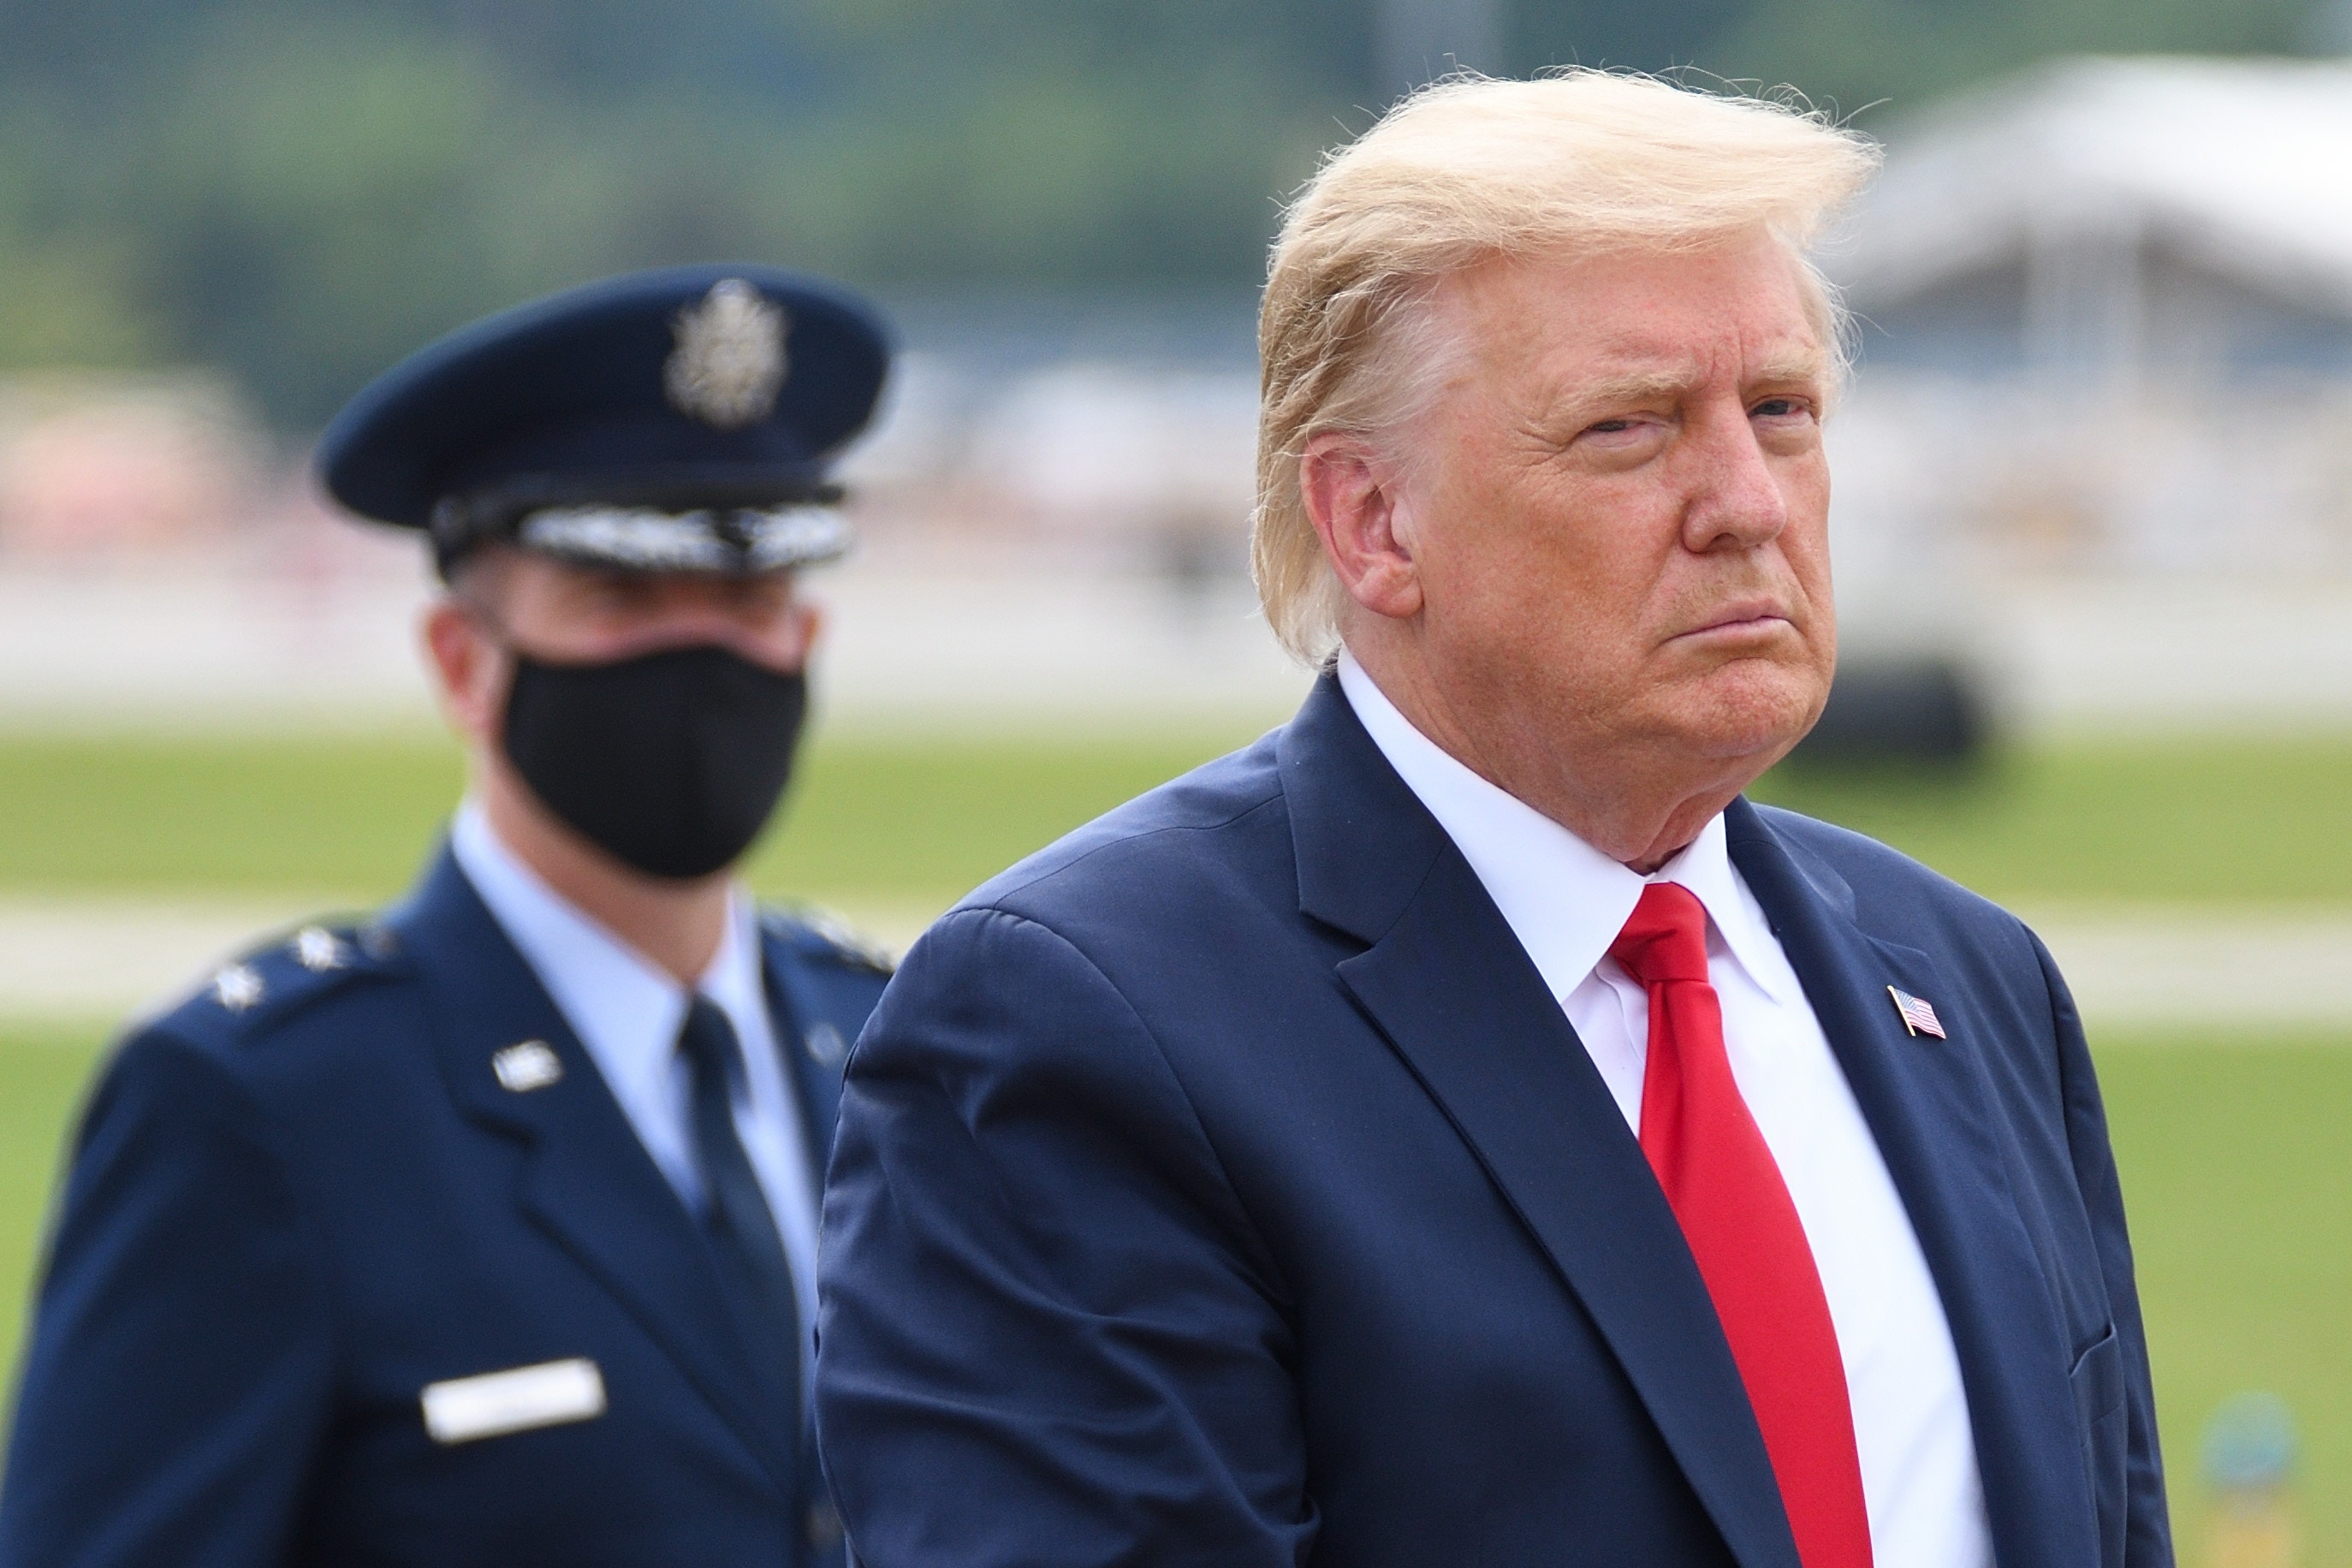 Trump Takes Swipe At Biden: Wouldn't Have Sat 'Back There' At Queen's Funeral 'If I Were President'